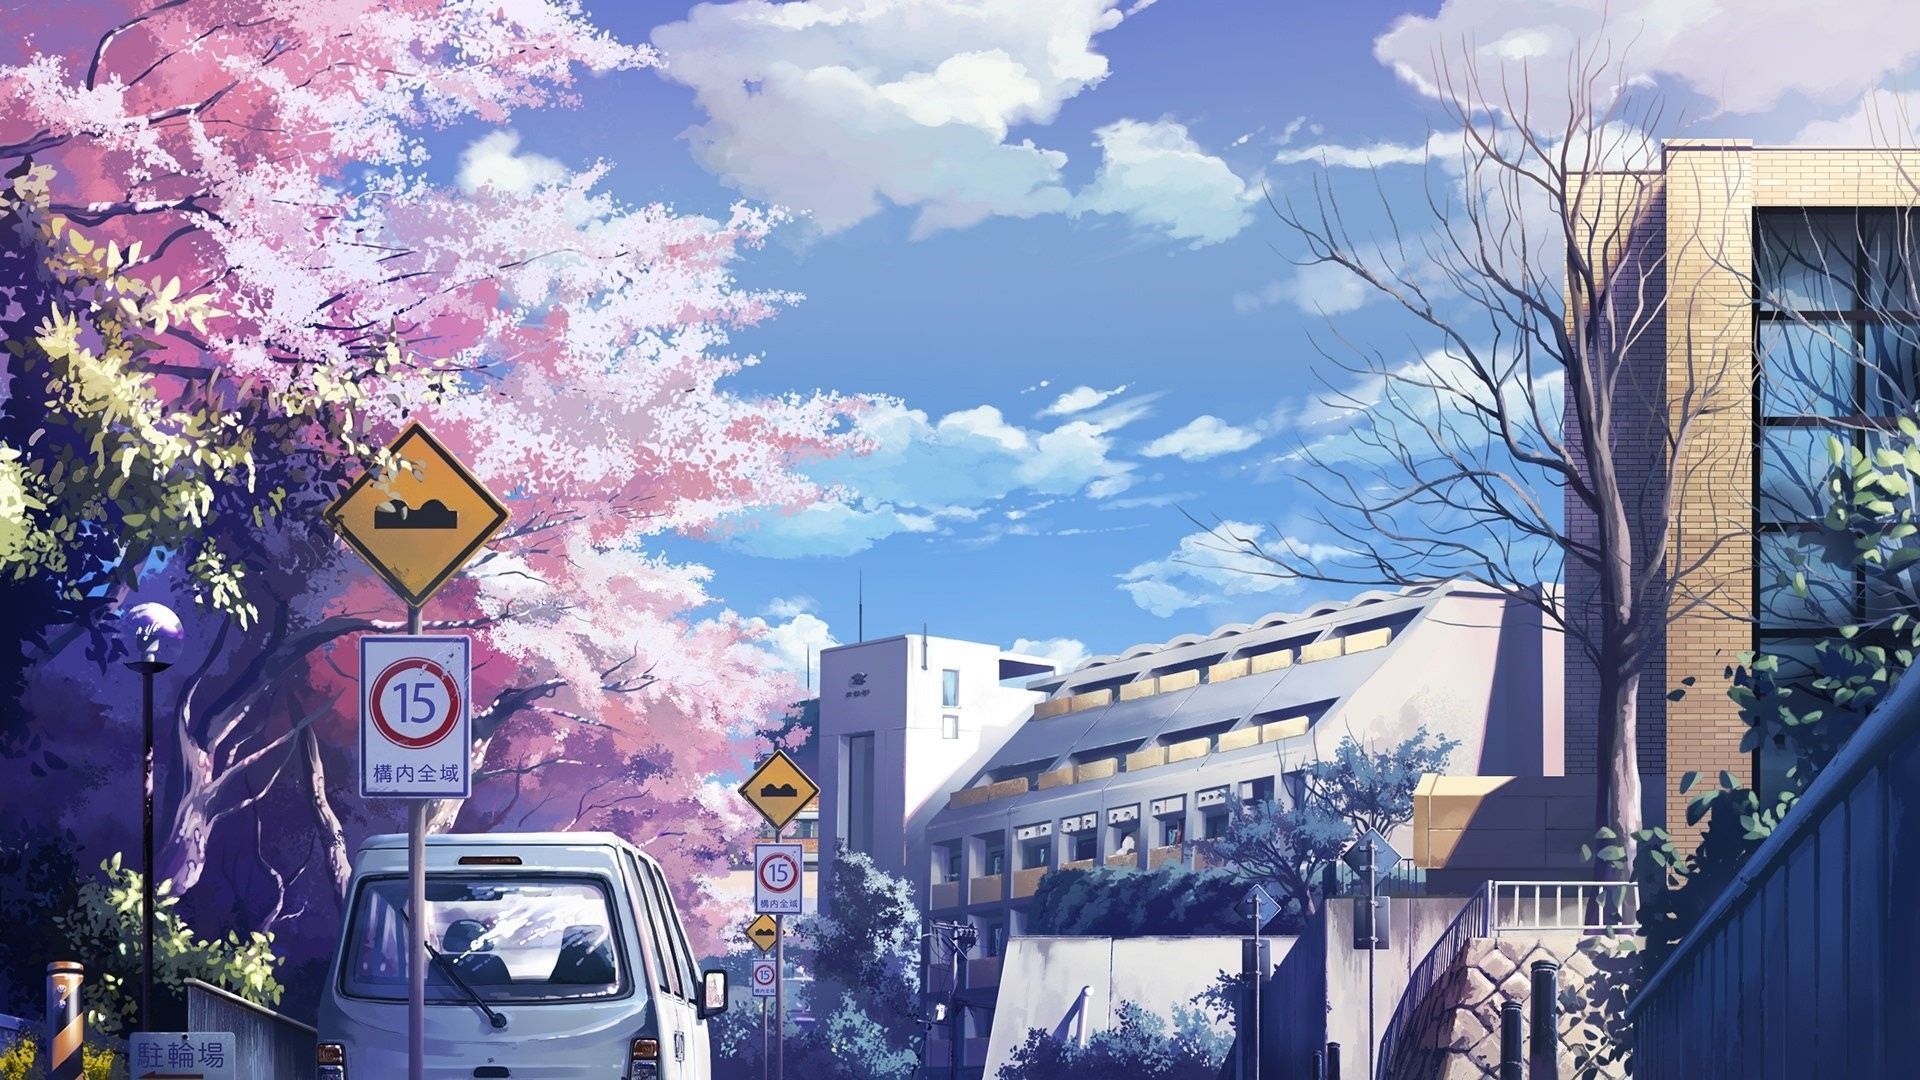 Anime scenery wallpaper with a truck and a bus - Anime landscape, anime